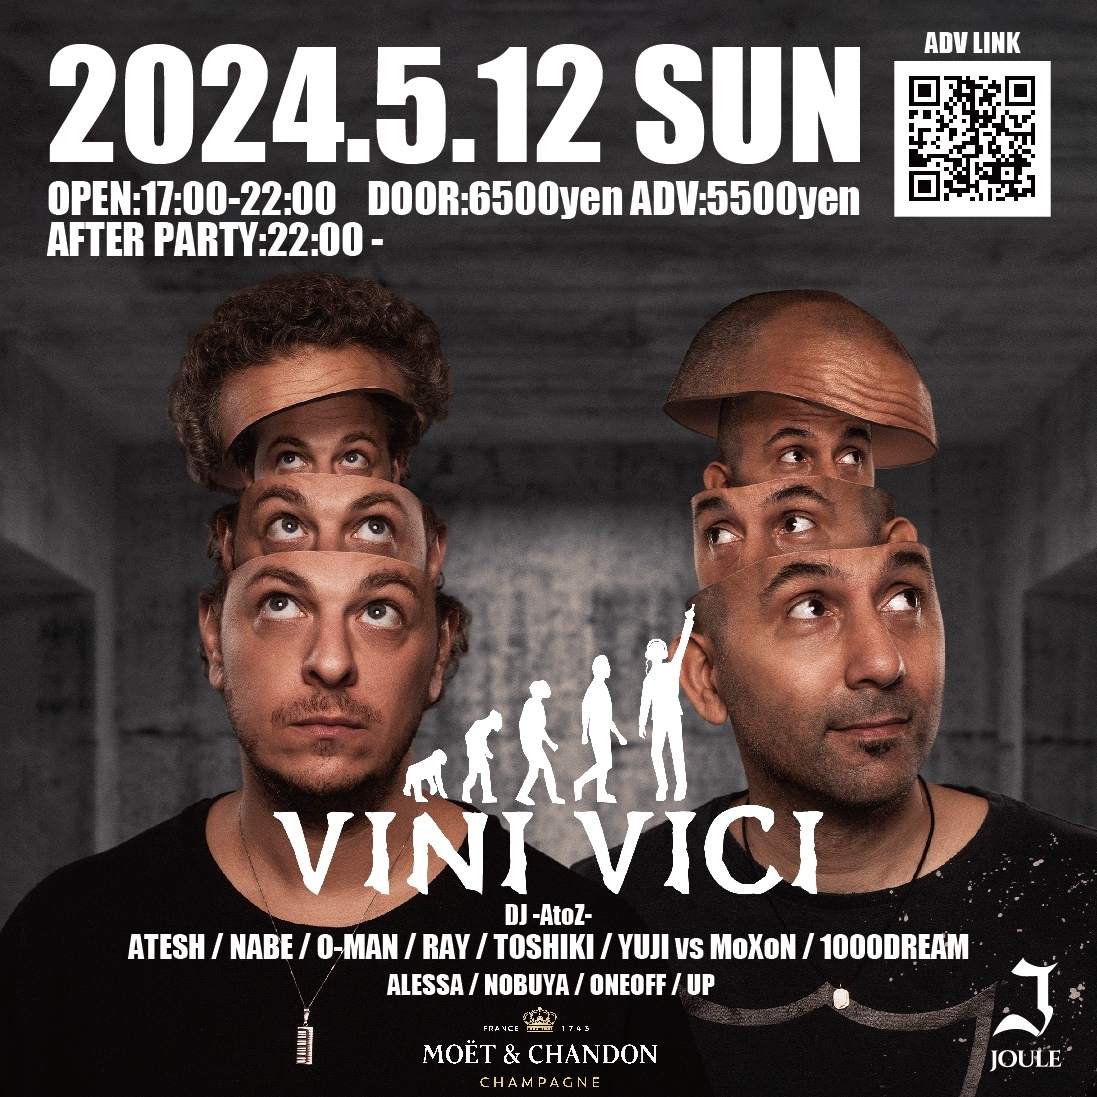 VINI VICI at Joule - フライヤー表